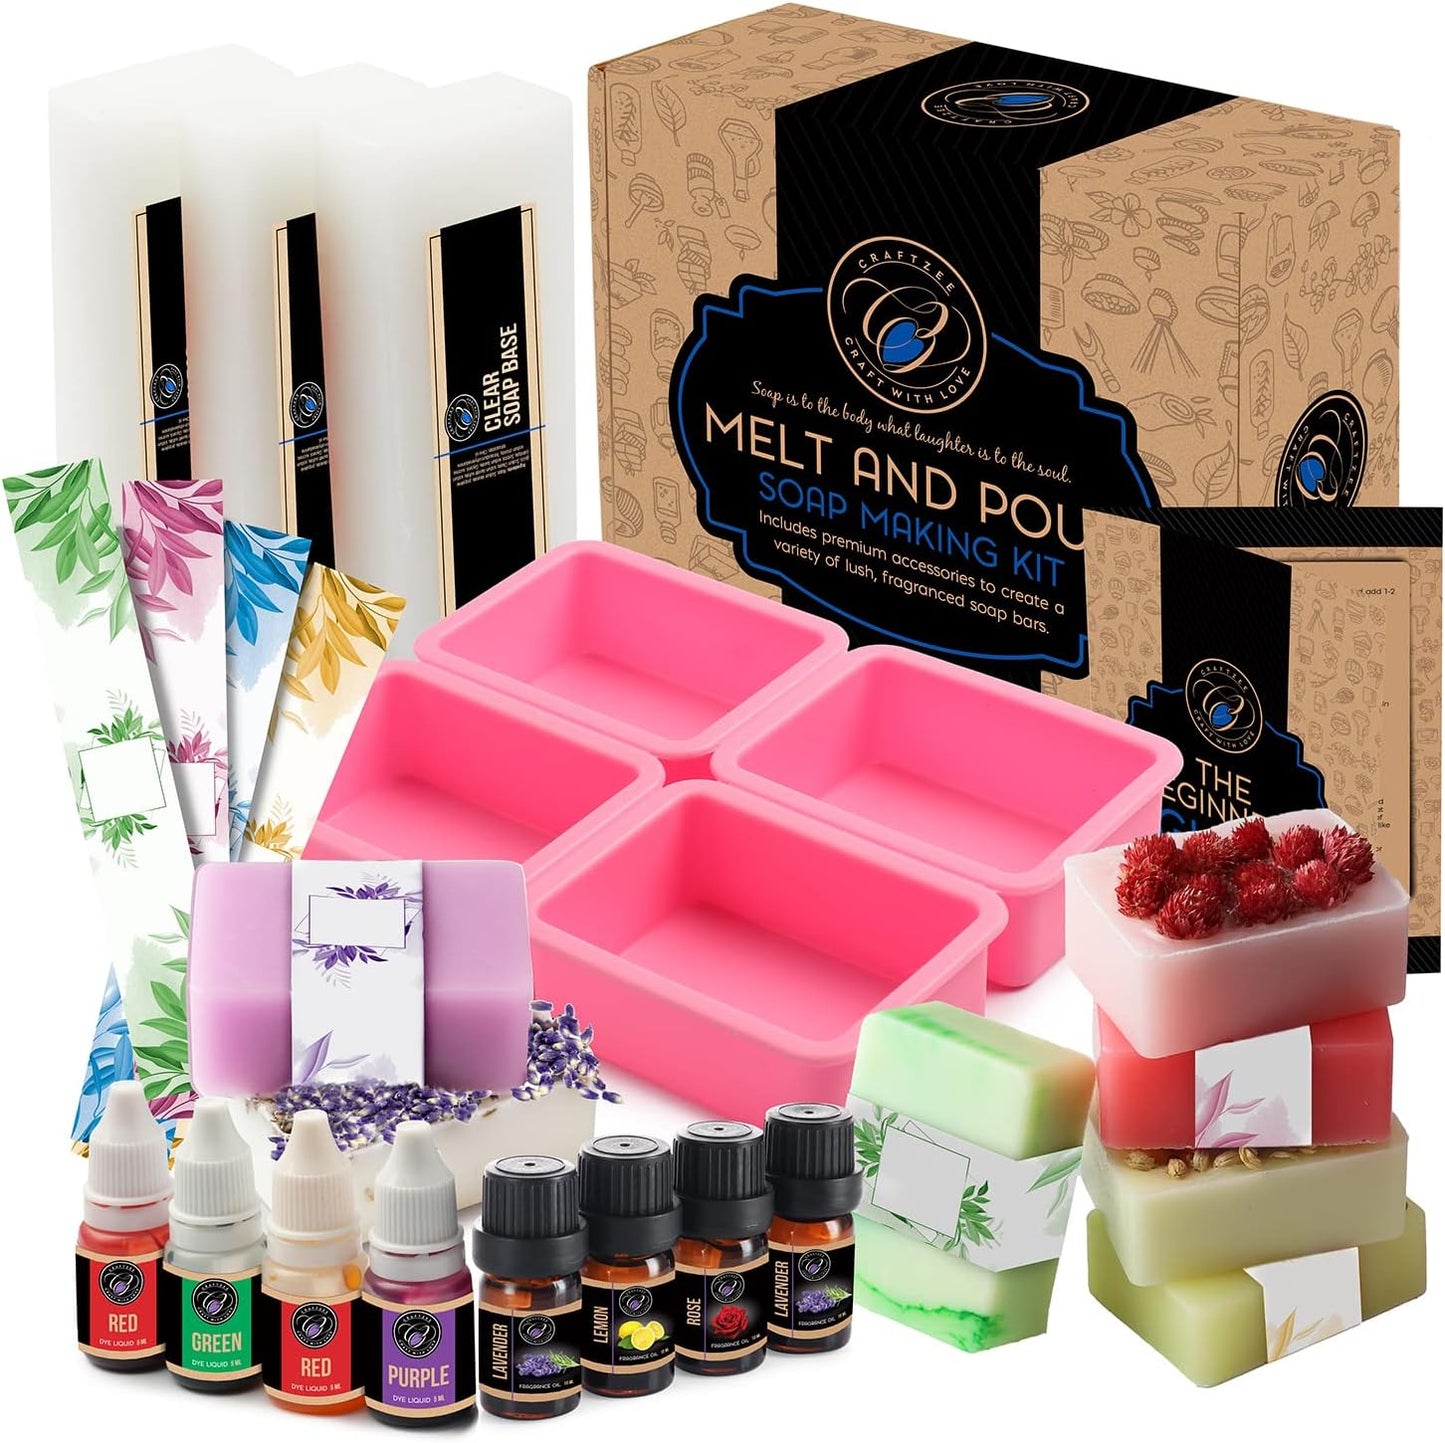 Soap Making Kit with Glycerin Soap Base, Fragrance Oils, Liquid Dyes, Silicone Molds, Wrappers & Instruction Manual